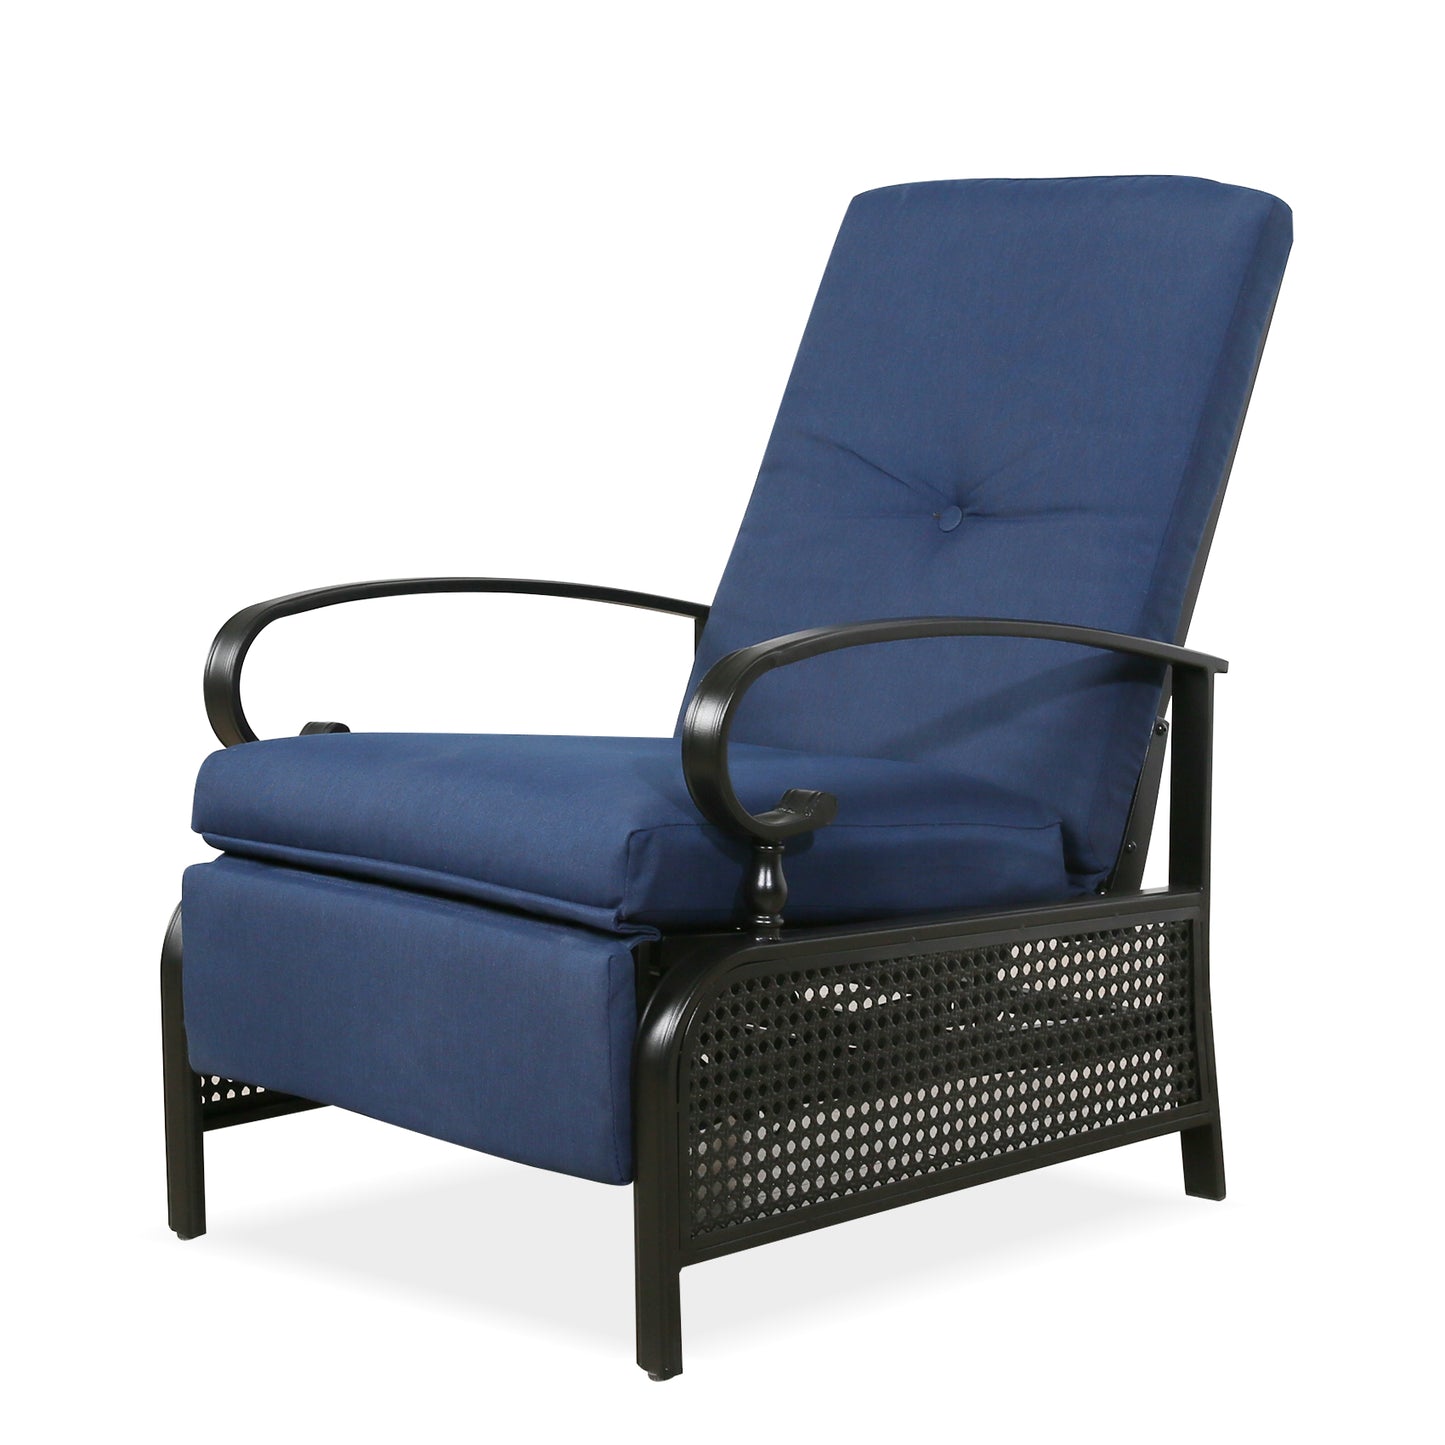 Patio Recliner Chair Automatic Adjustable Back Outdoor Lounge Chair with 100% Olefin Cushion (Navy Blue)